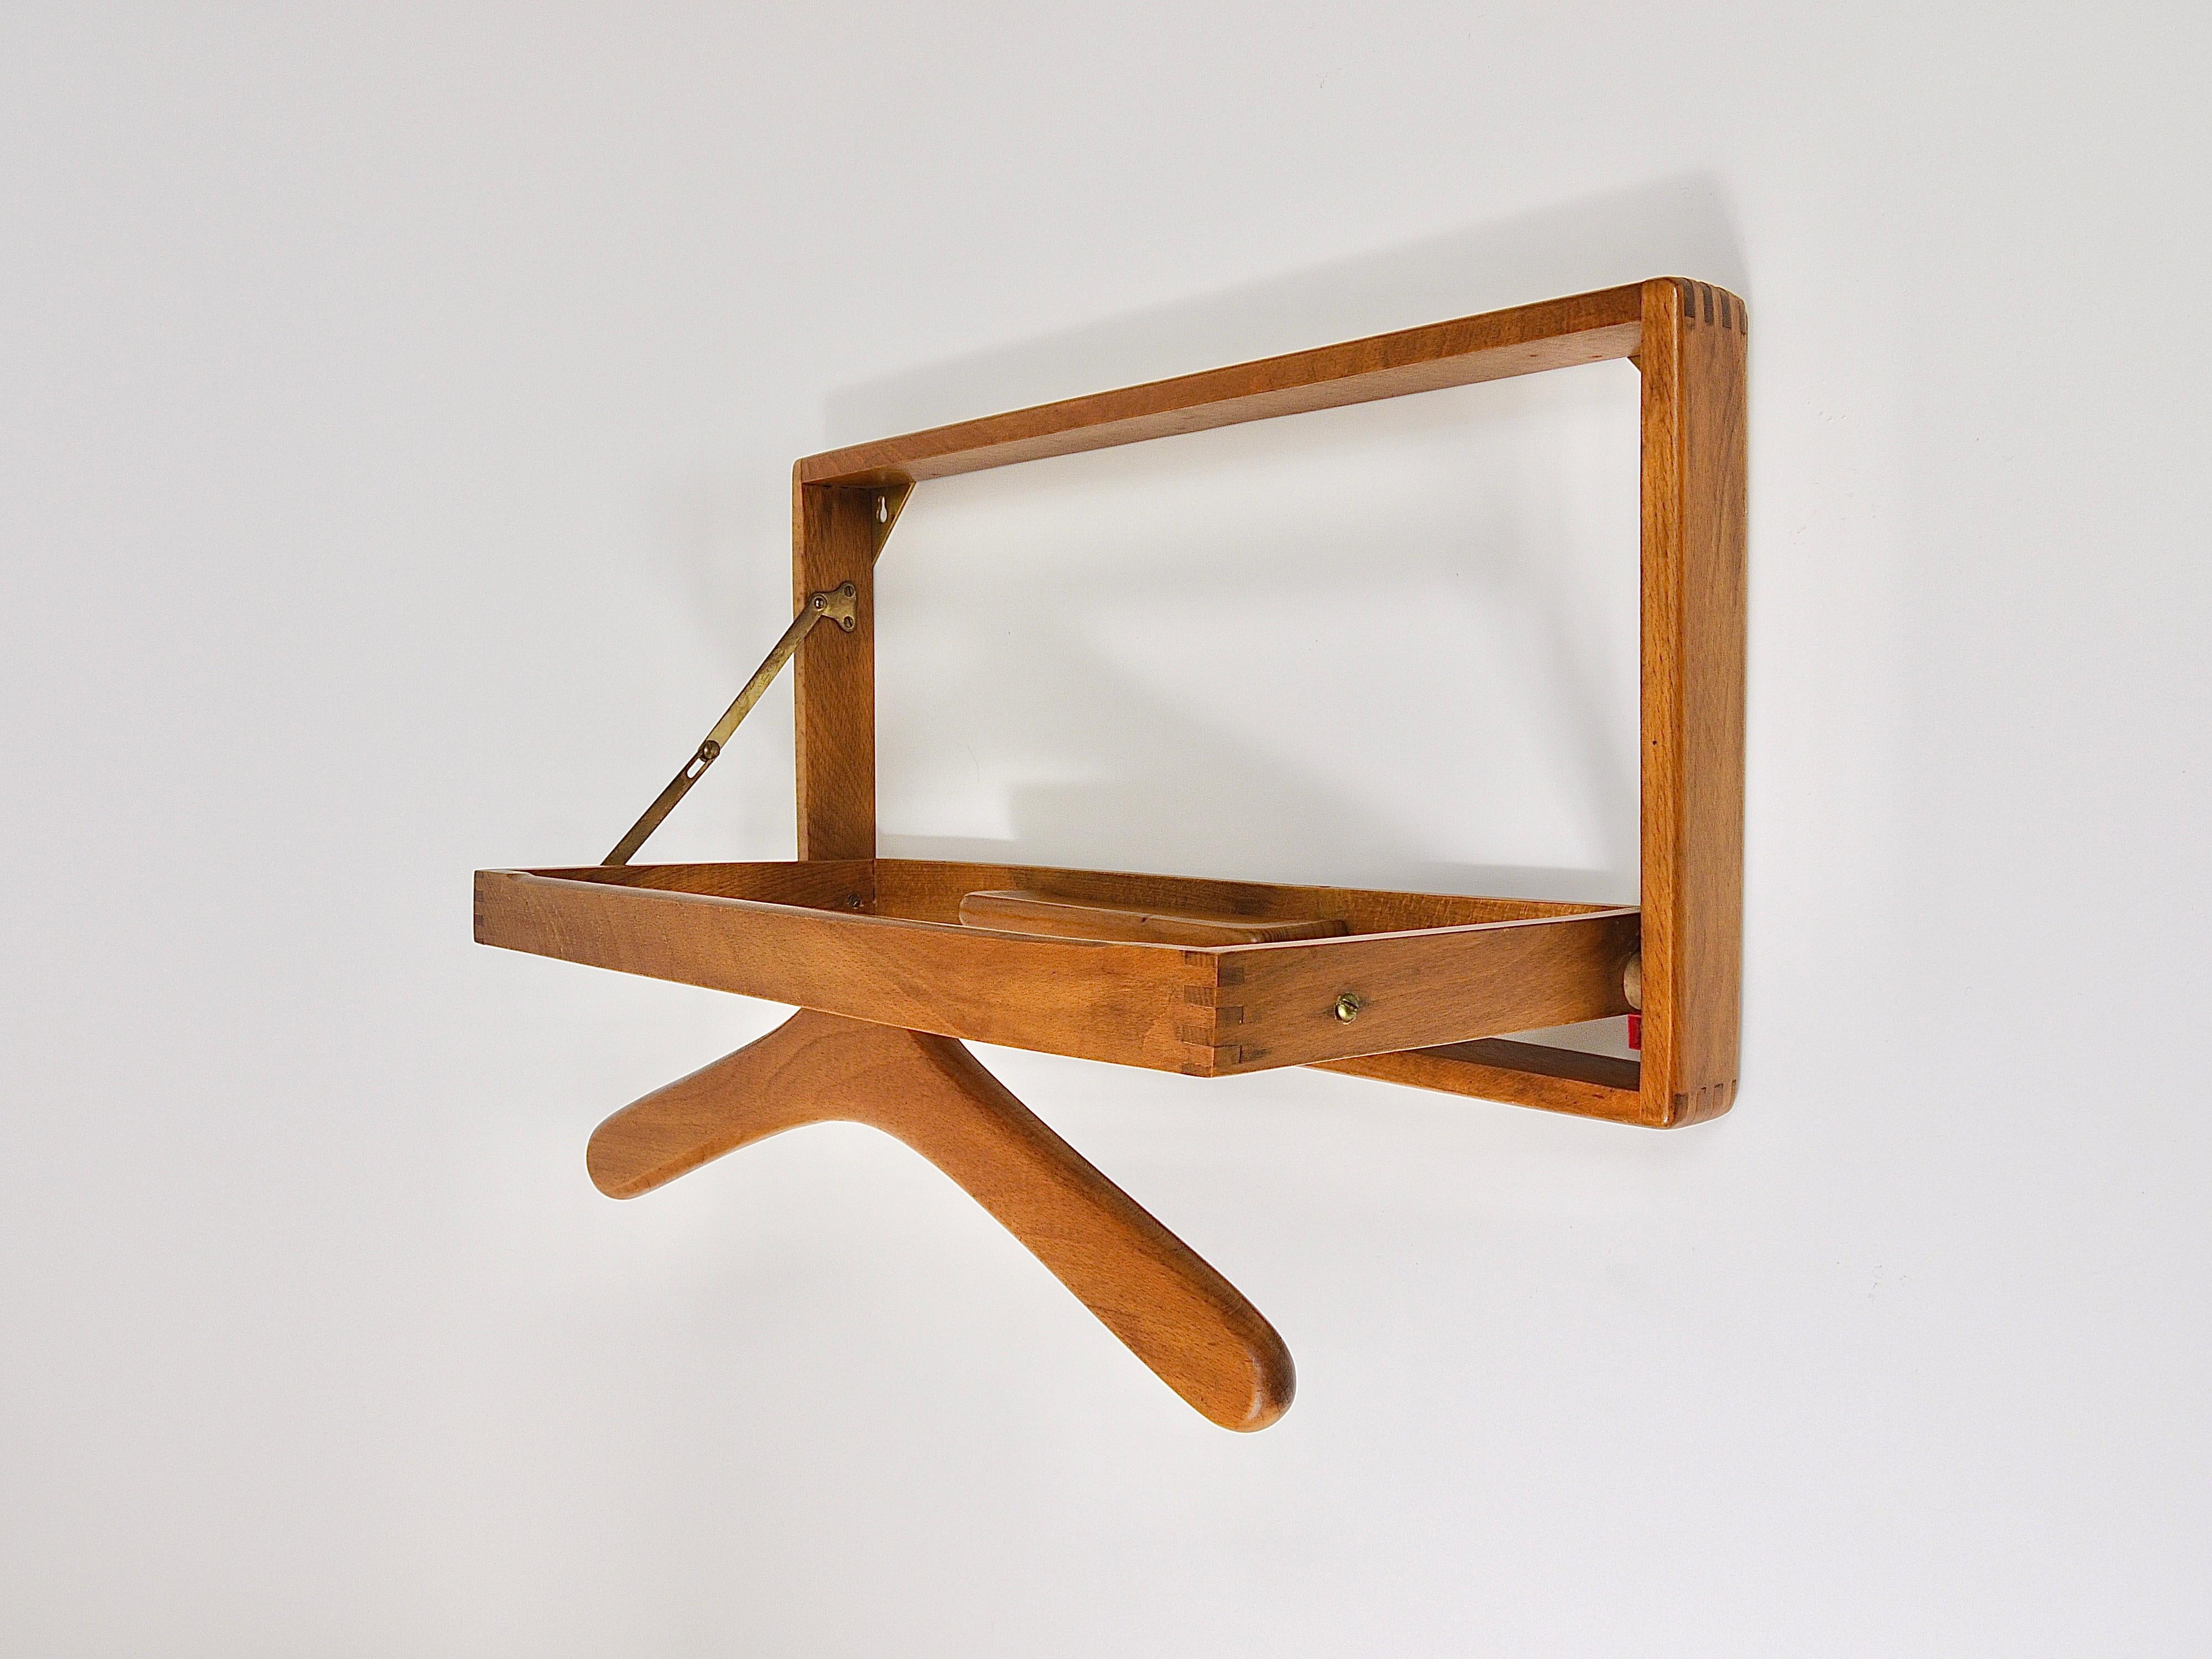 A ingenious and functional midcentury modern foldable wall valet / coat rack. Made of teak in Denmark in the 1960s. It has a folding-out hanger hold jackets, shirts, ties or pants and has also space for cufflinks, rings or a watch. In good